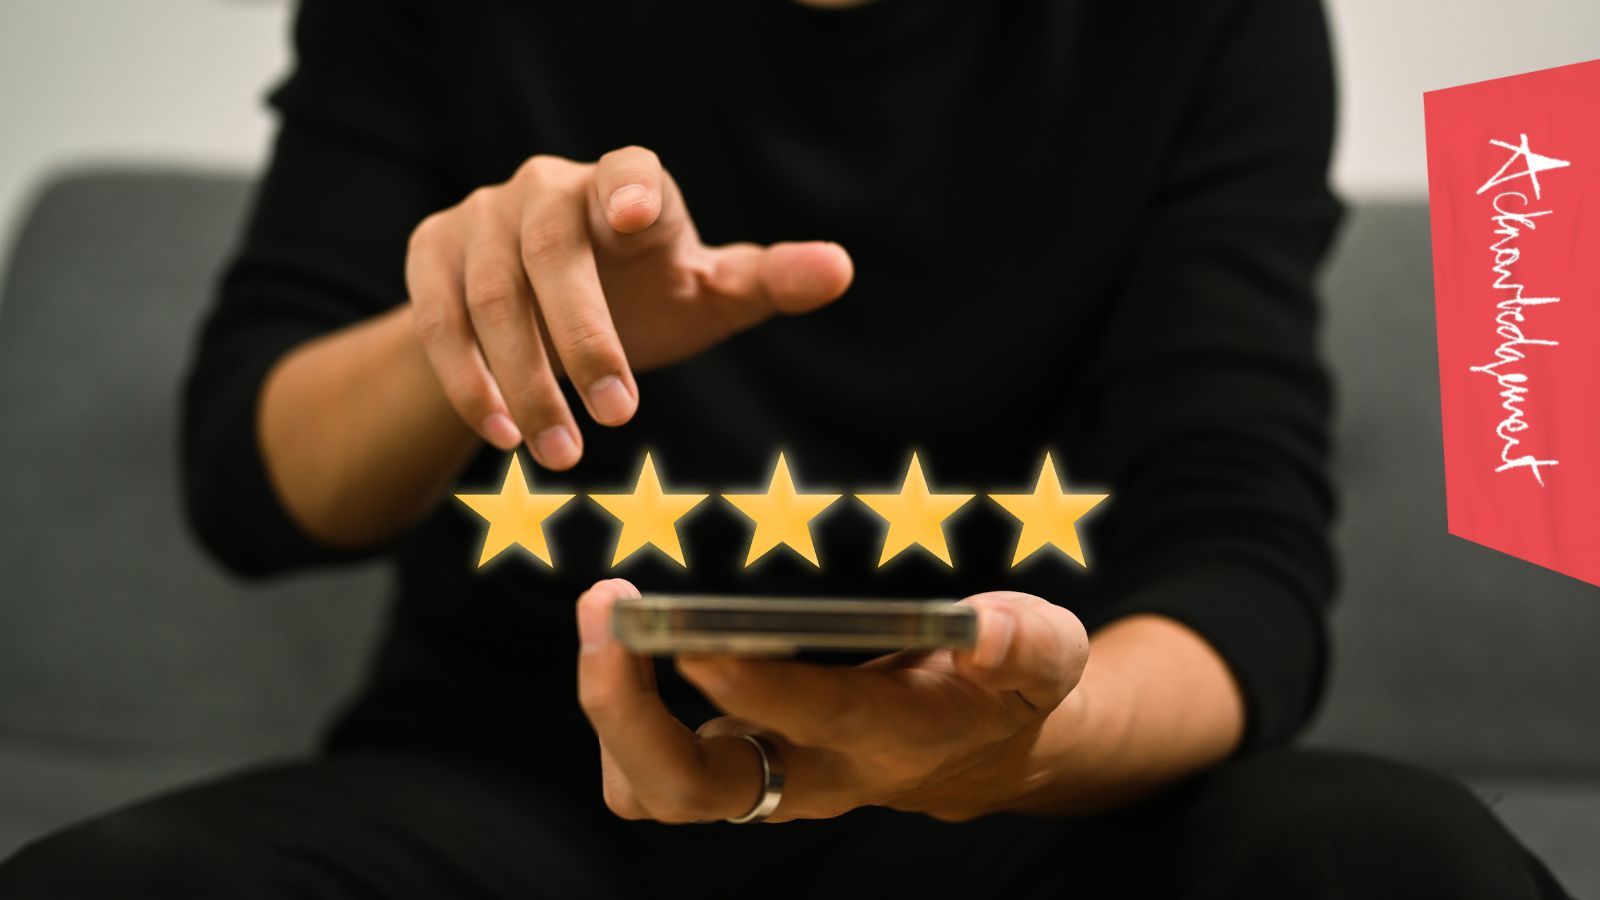 "Five star review" title graphic showing someone using a smart phone